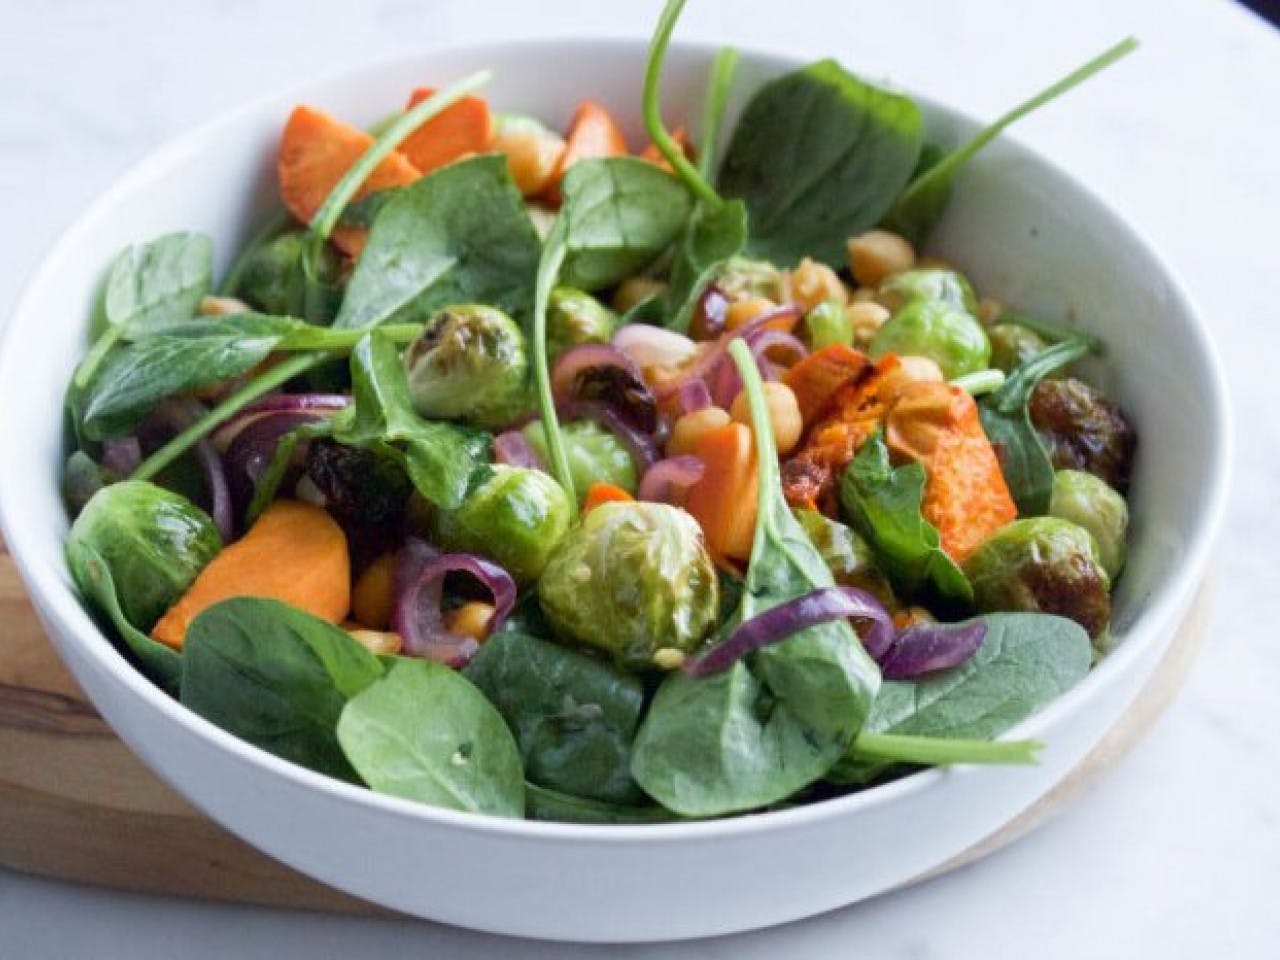 Roasted Brussels sprouts with sweet potato and chickpeas